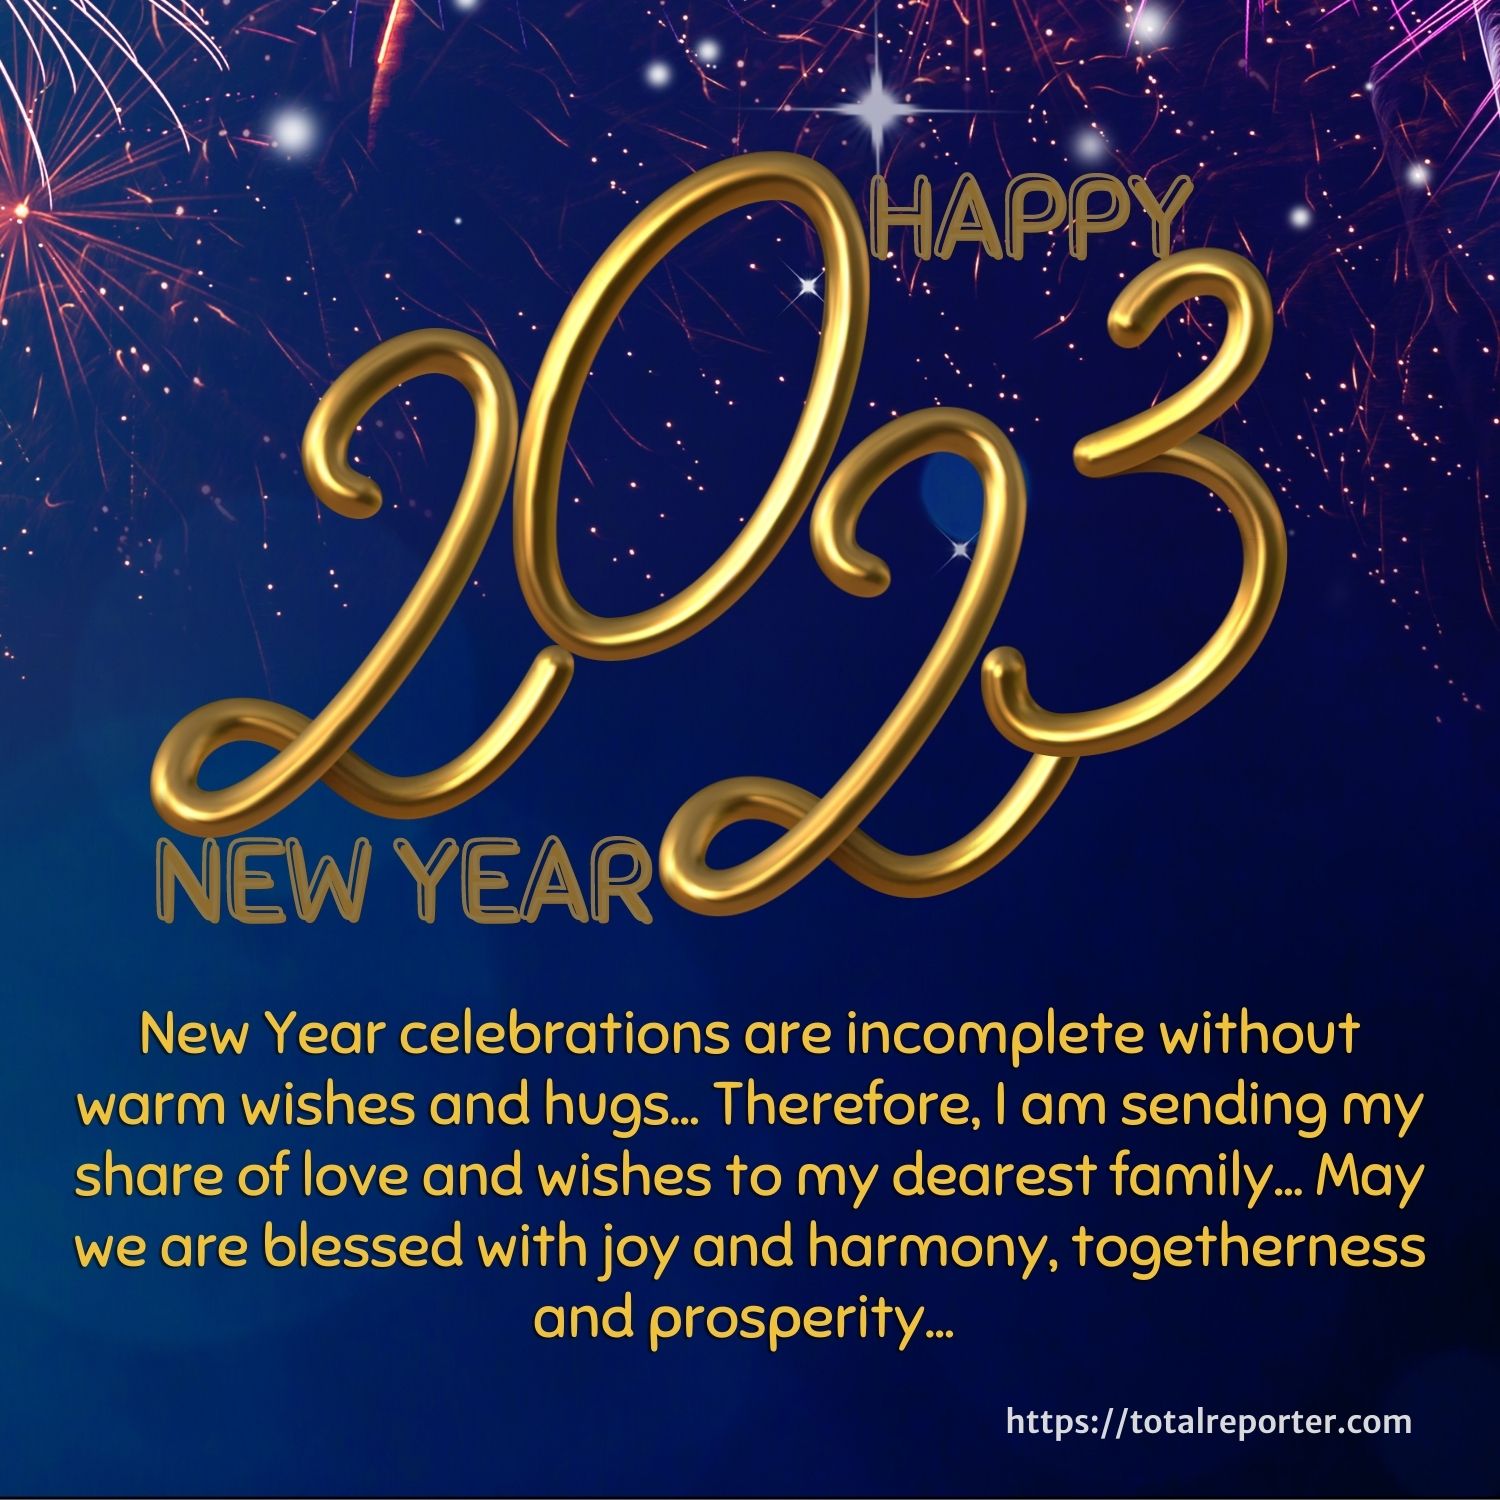 Happy New Year wishes Images for Facebook